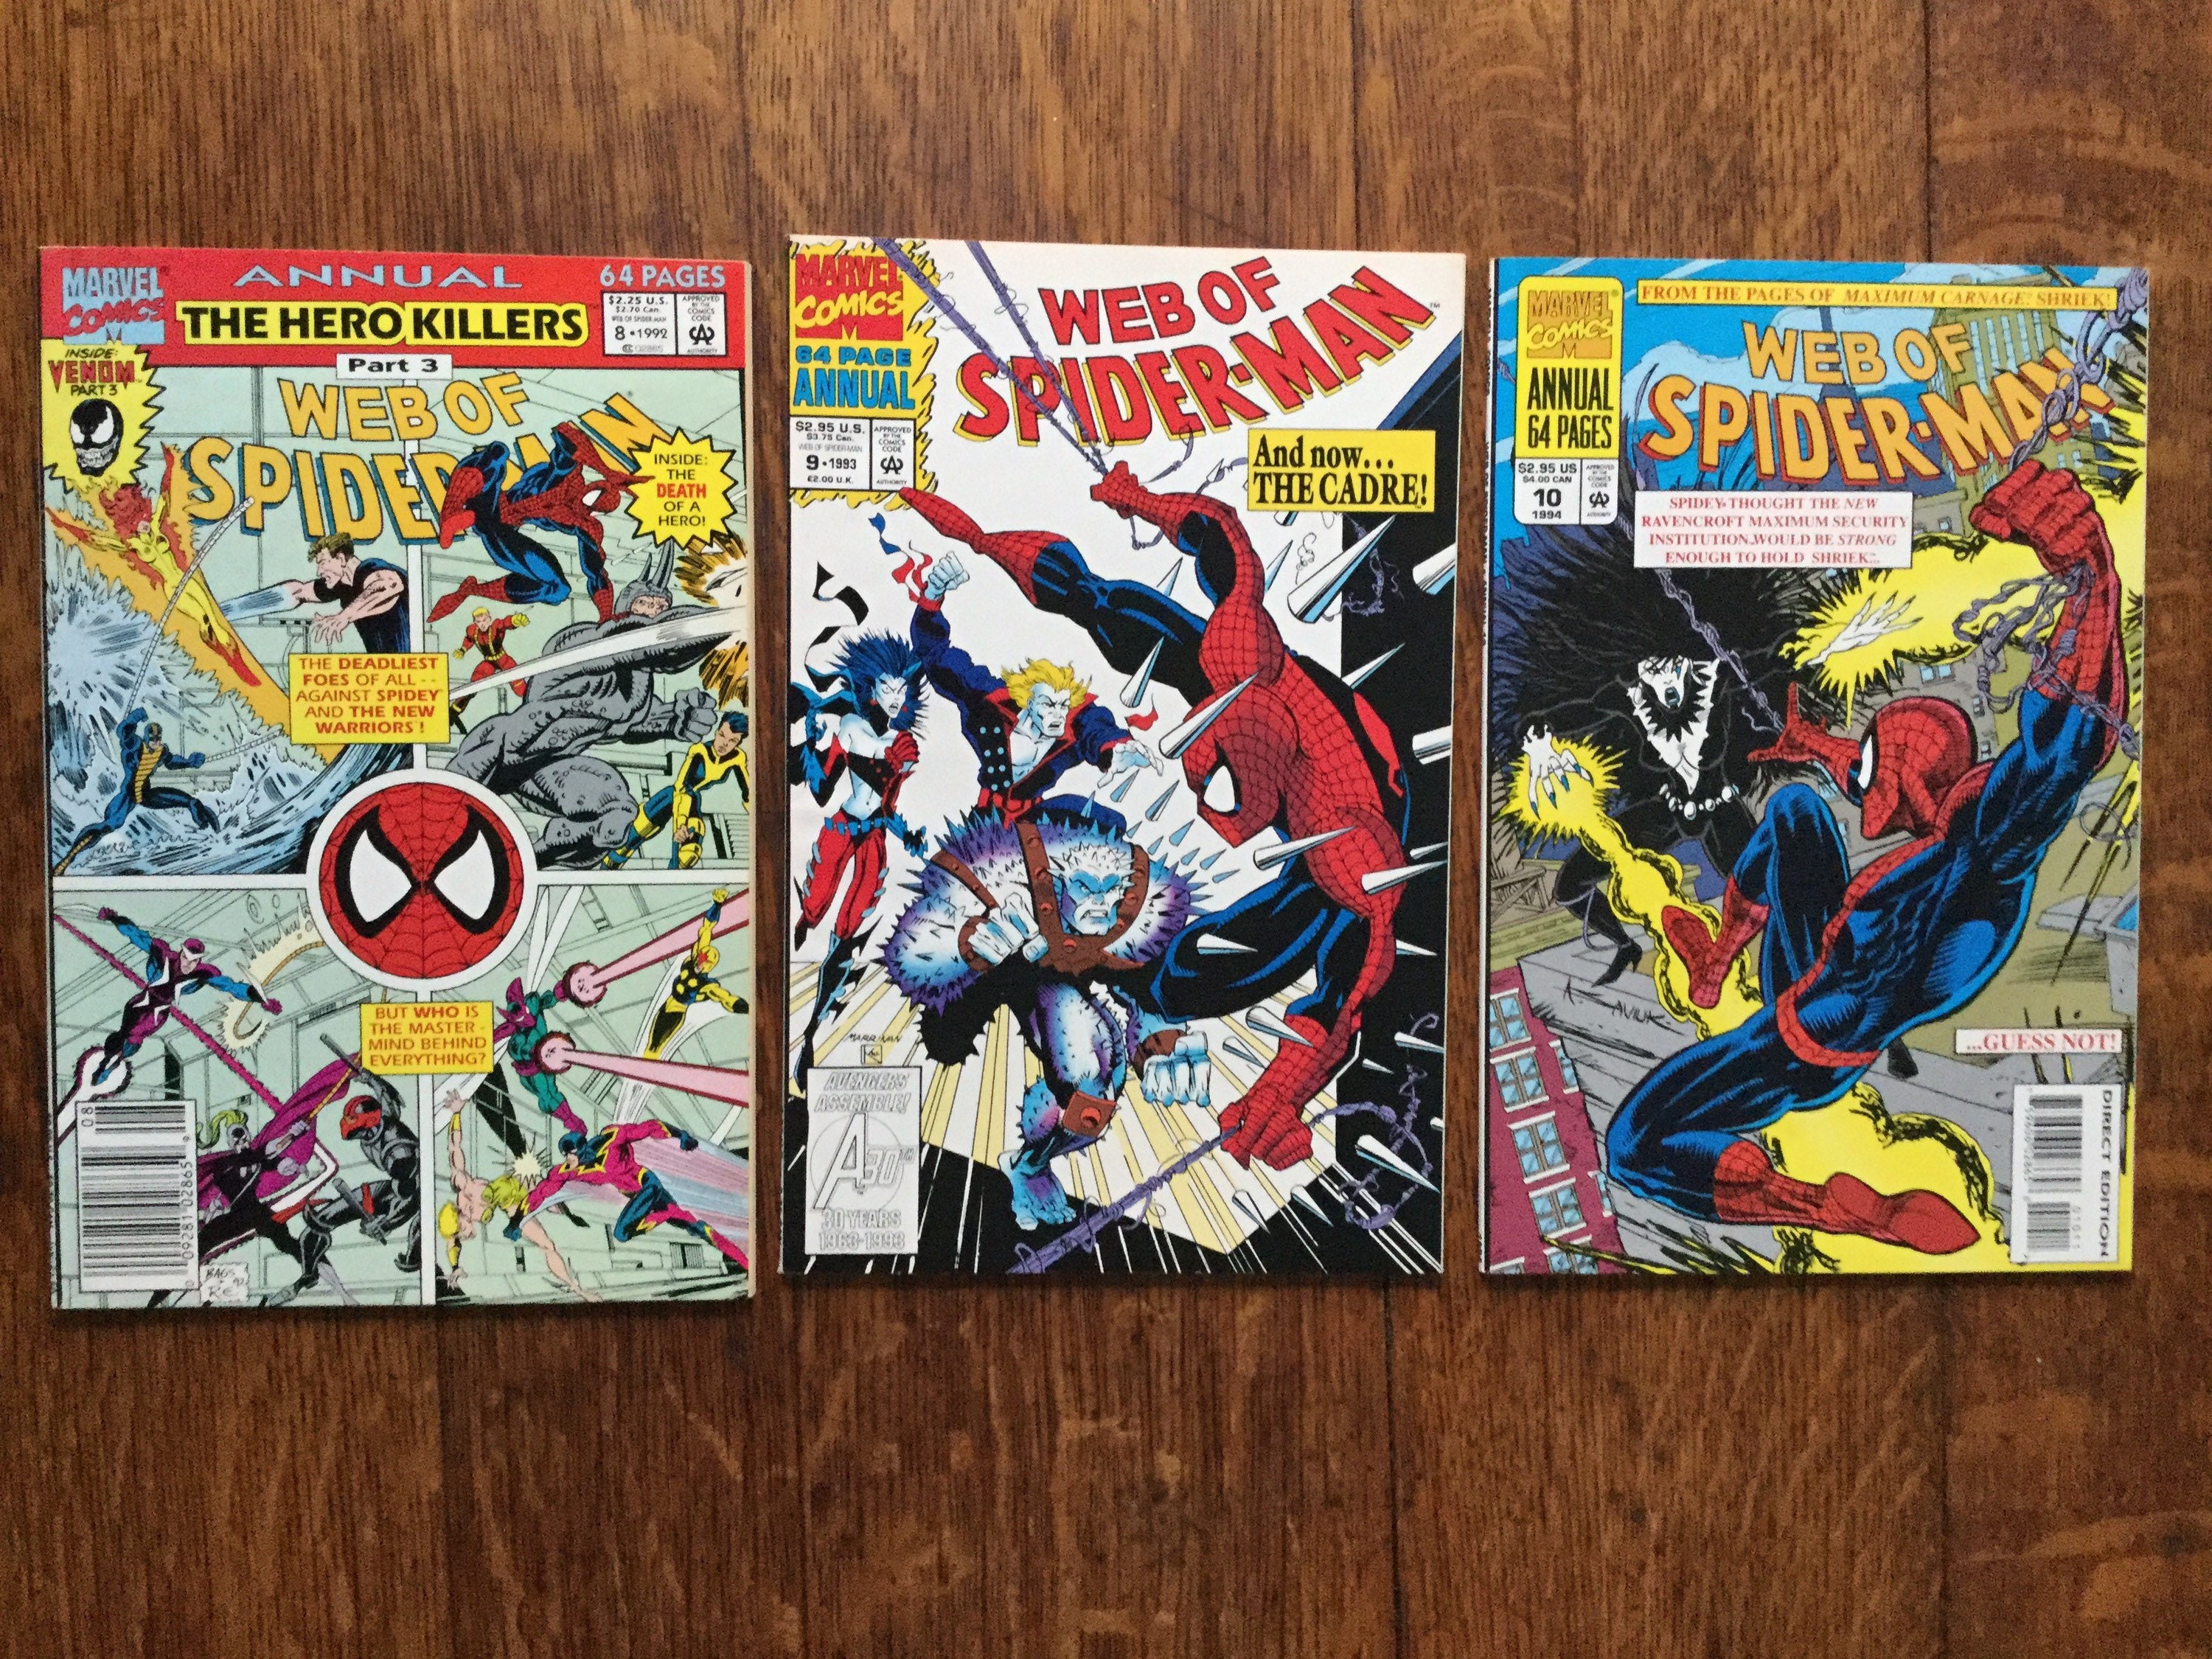 Web of Spider-man Annual 8 9 & 10 1992 93 94 Marvel - Etsy New Zealand